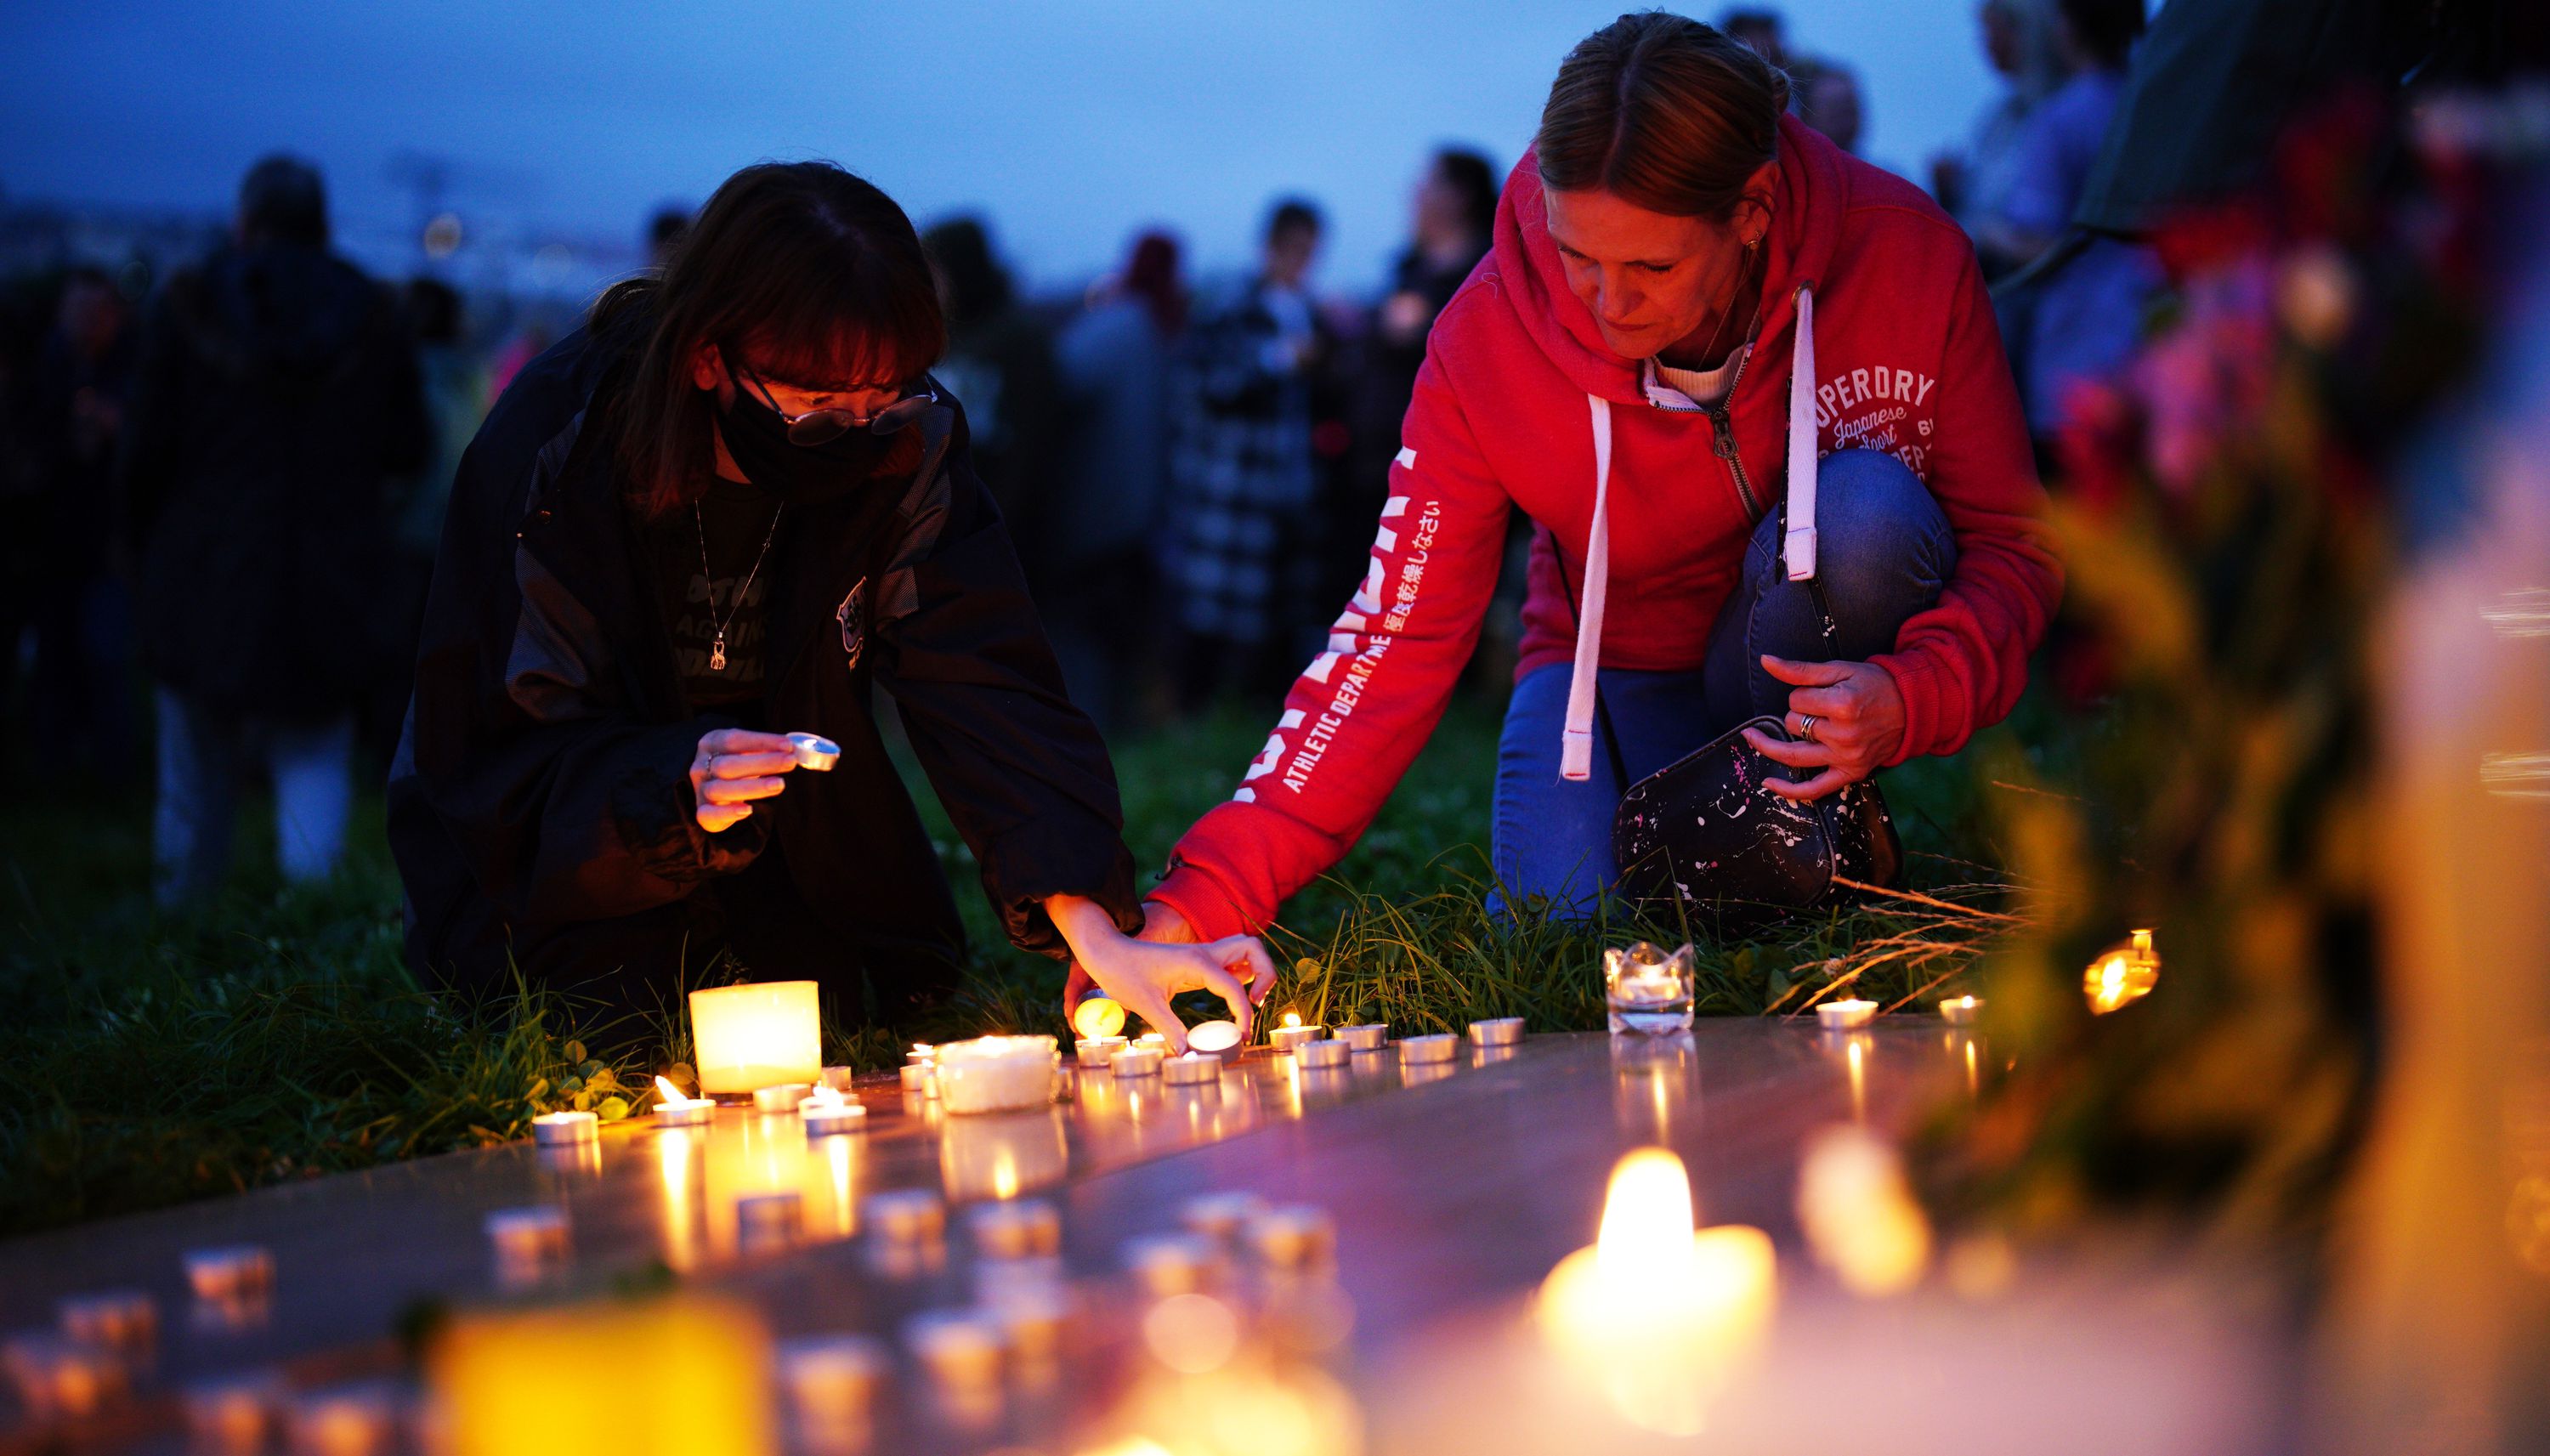 Women light candle at a vigil for the victims of the Keyham mass shooting at North Down Crescent Park in Keyham, Plymouth.